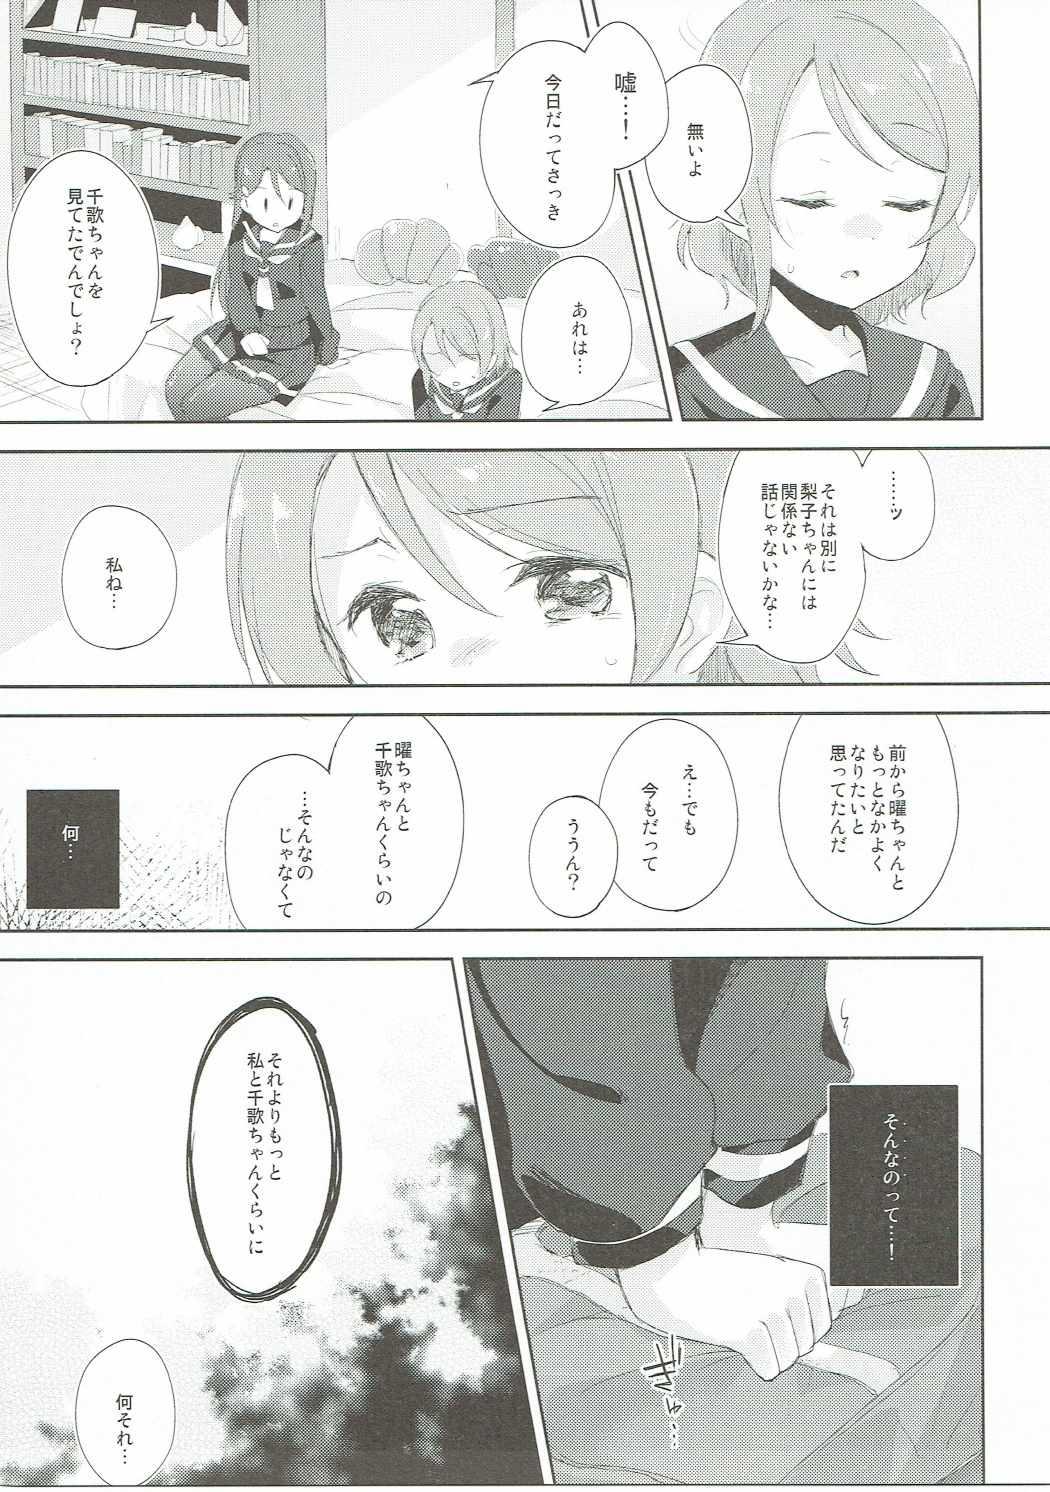 Tied Youjo yousolo - Love live sunshine Bokep - Page 10